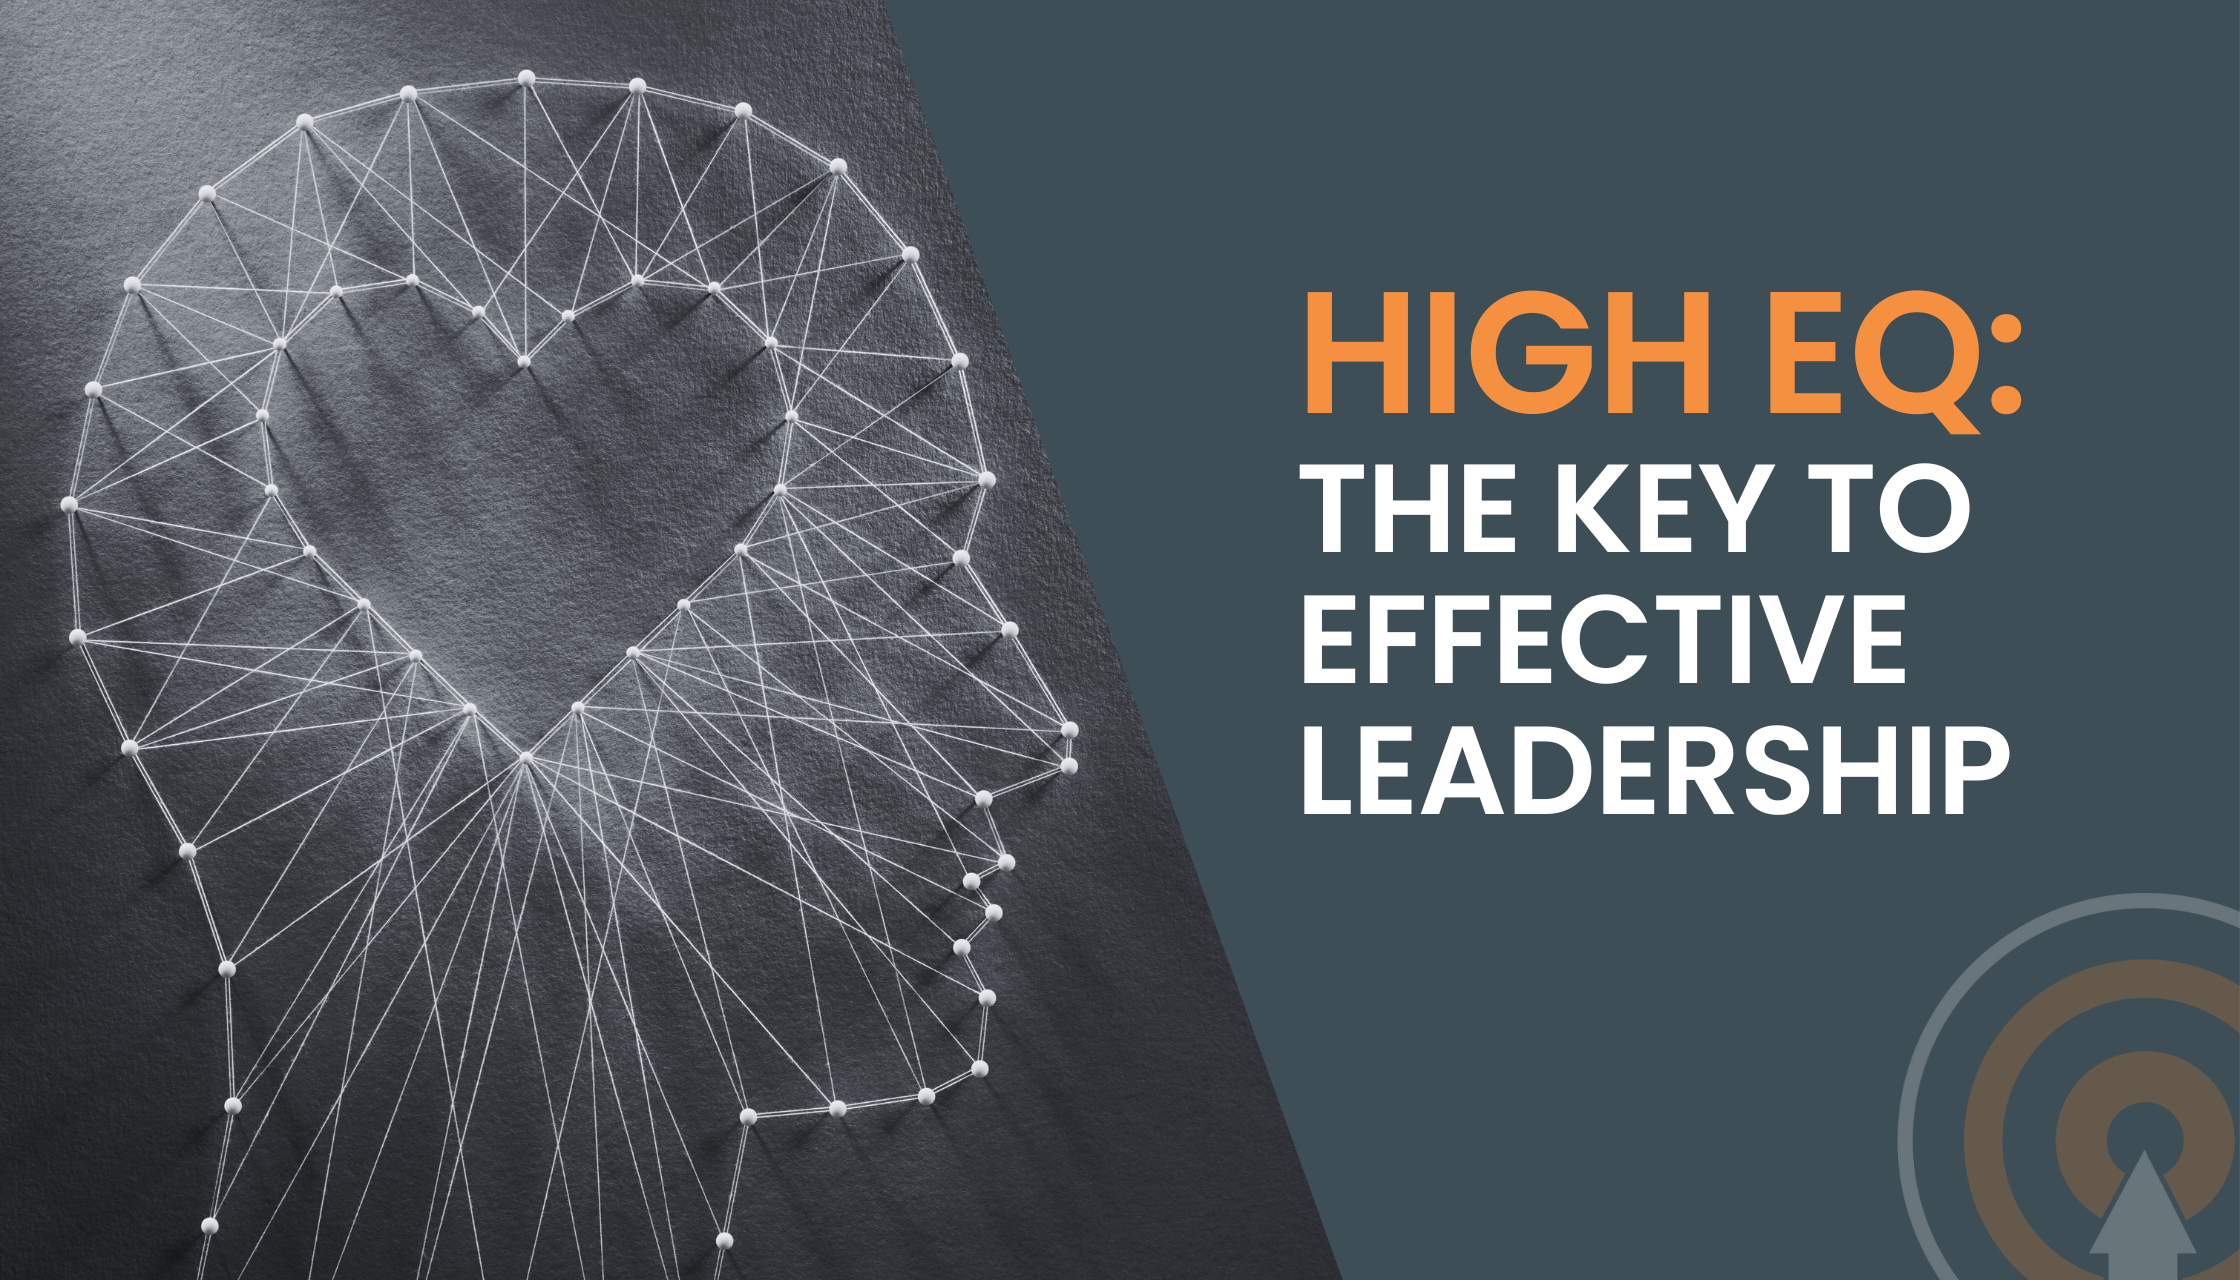 The Key to Effective Leadership